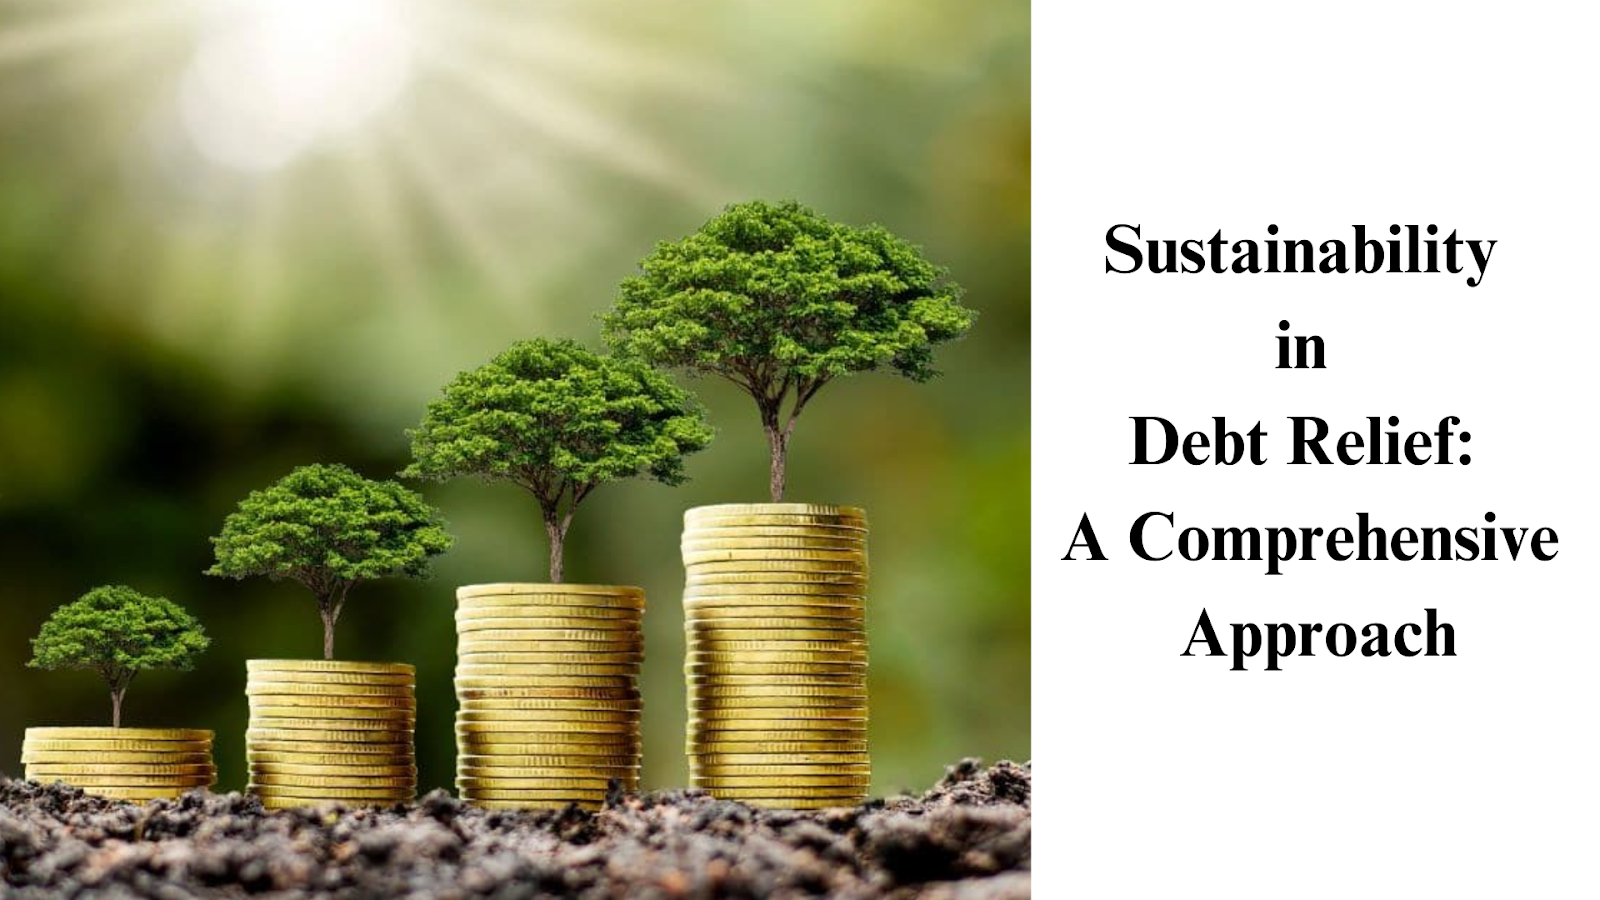 Sustainability in Debt Relief: A Comprehensive Approach